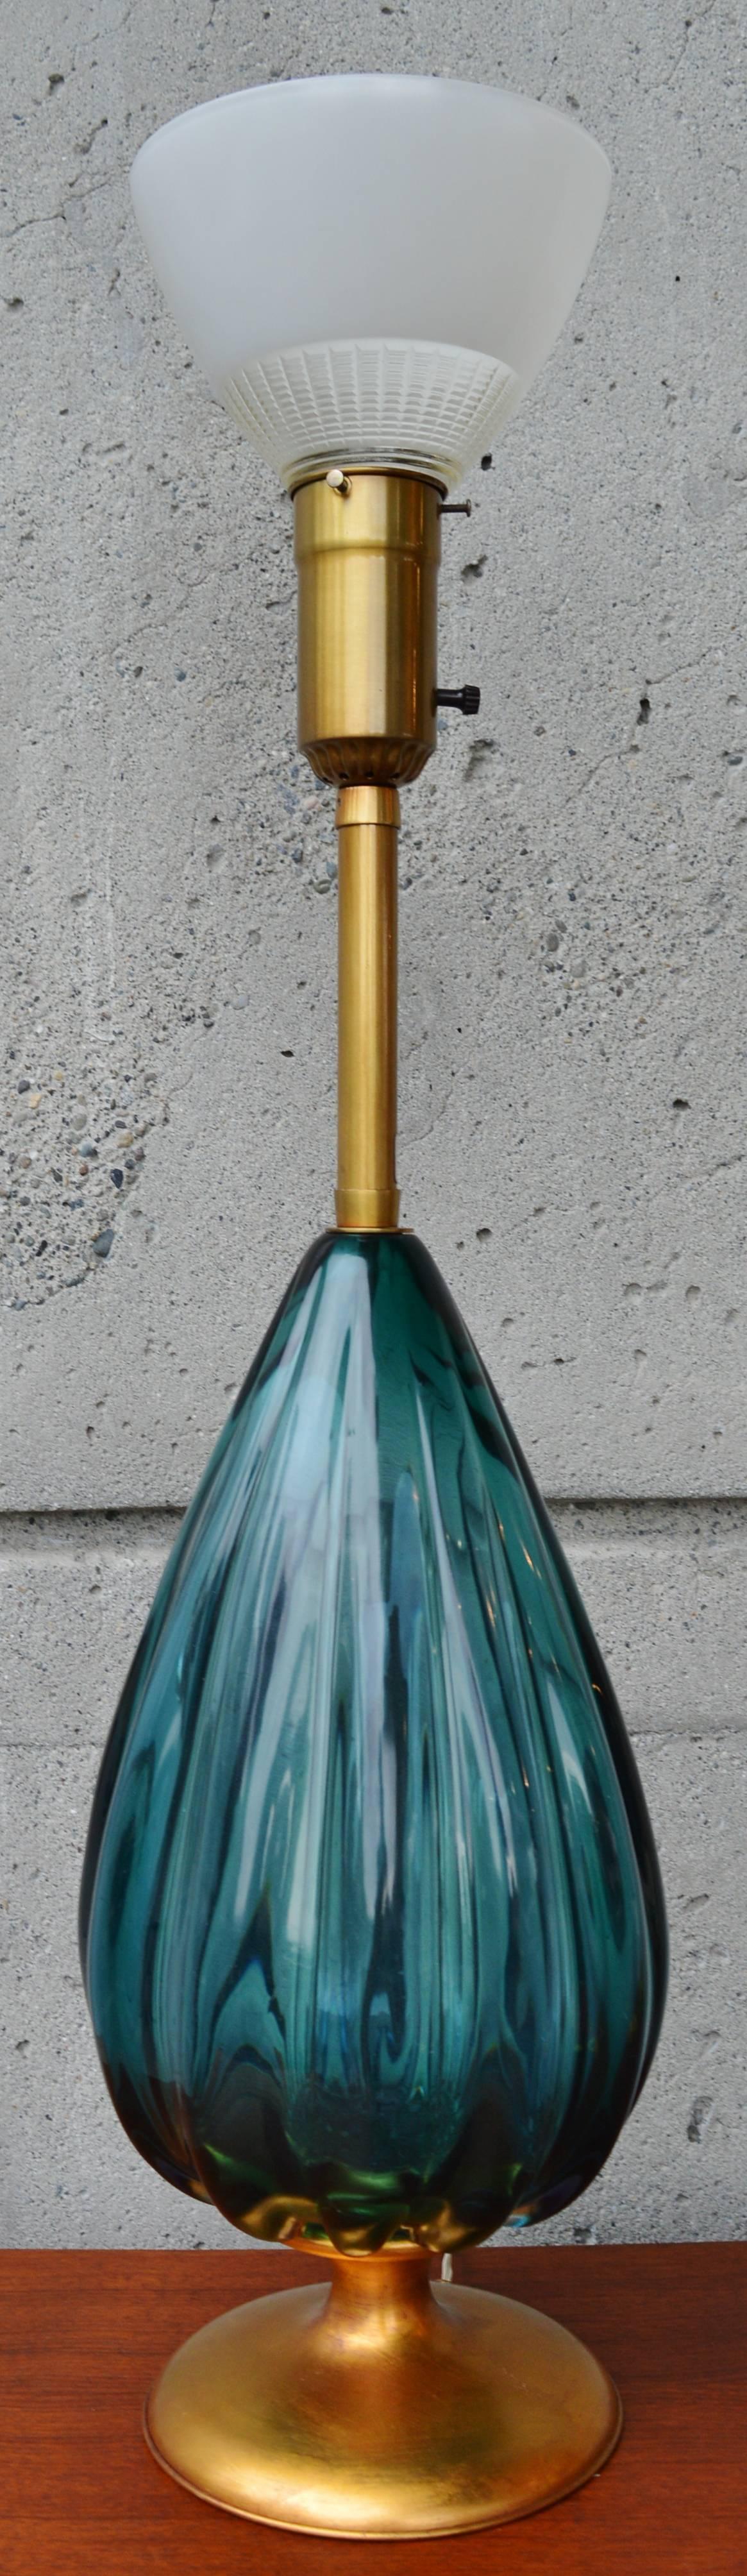 This eye pleasing peacock blue scalloped glass lamp is monumental in size and style! Designed by Archimede Seguso for The Marbro Lamp Company. Featuring a gilt mahogany base and stem - still with the original sticker bearing the motto: Old World